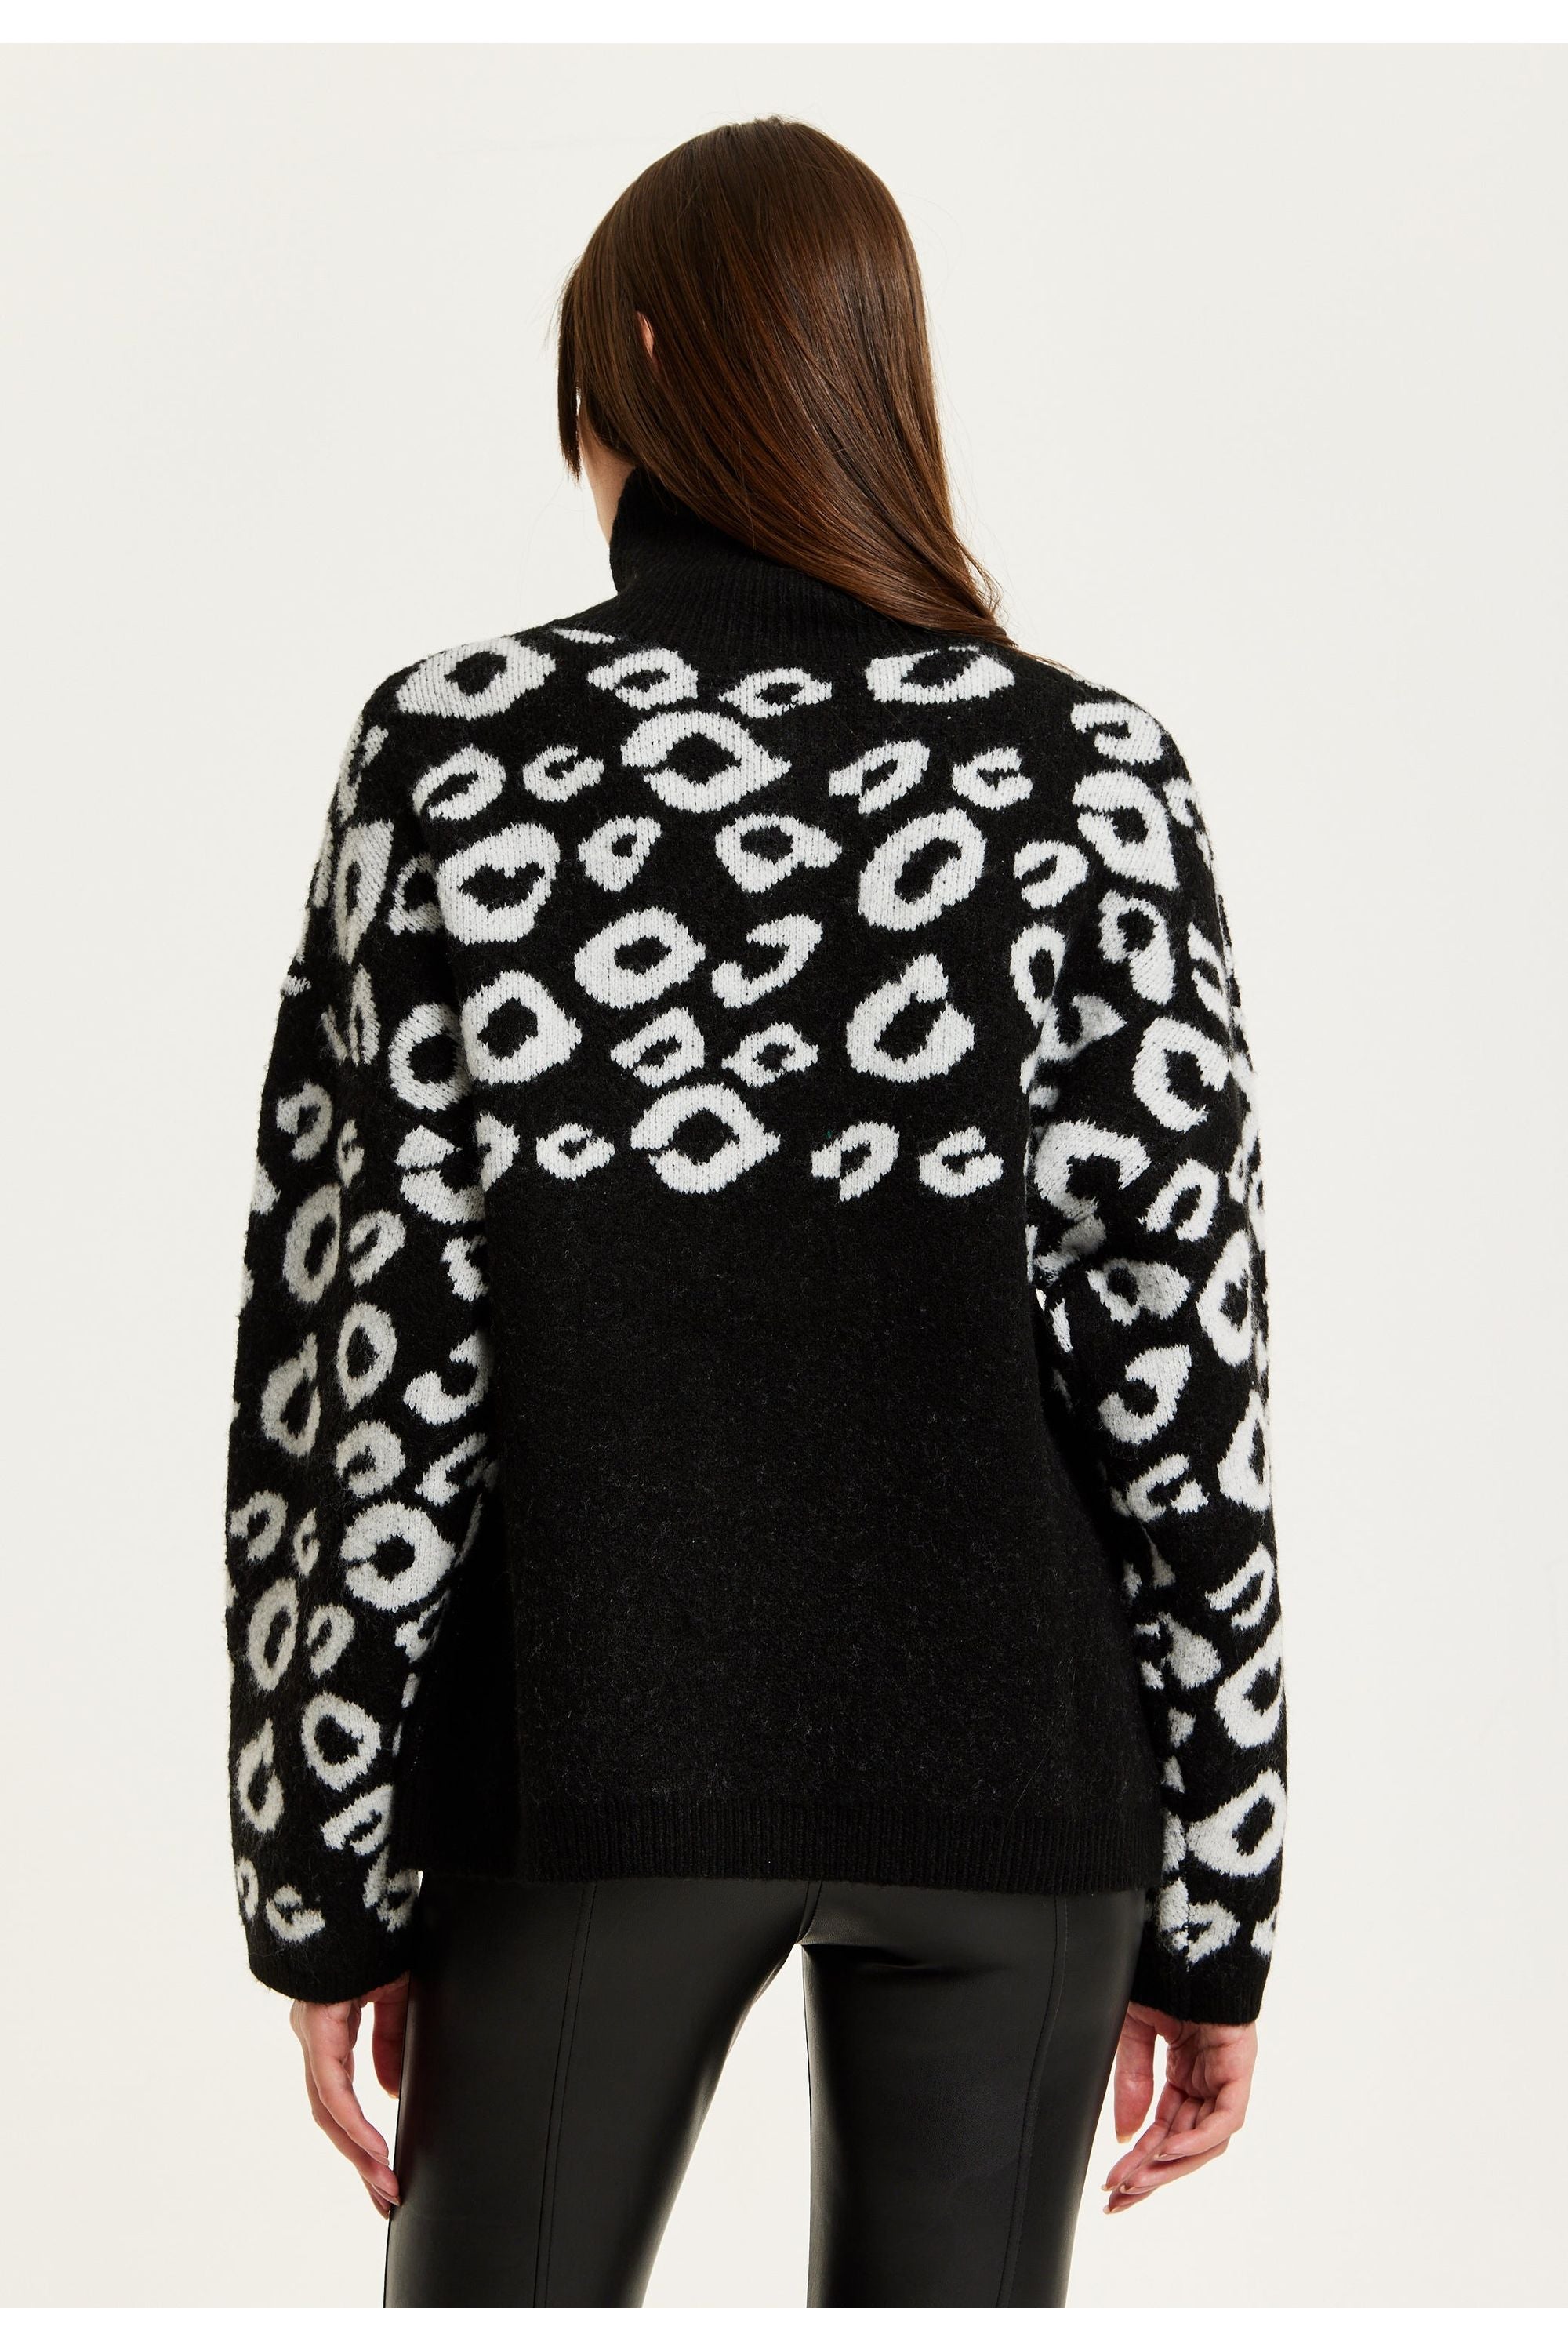 Black And White Jacquard Animal Pattern Jumper With Zip Front B25-LIQ23AW021